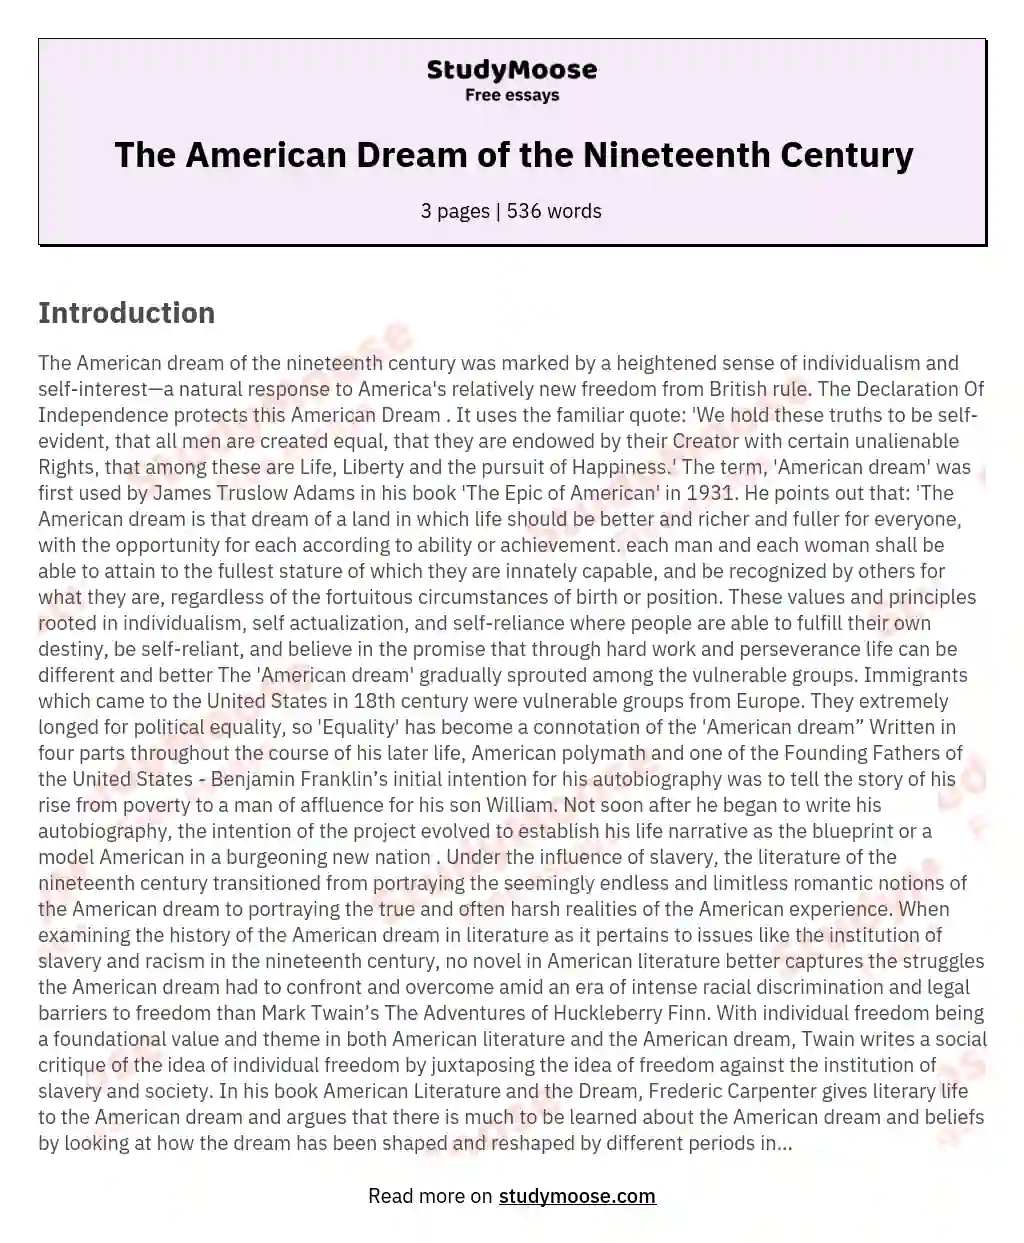 The American Dream of the Nineteenth Century